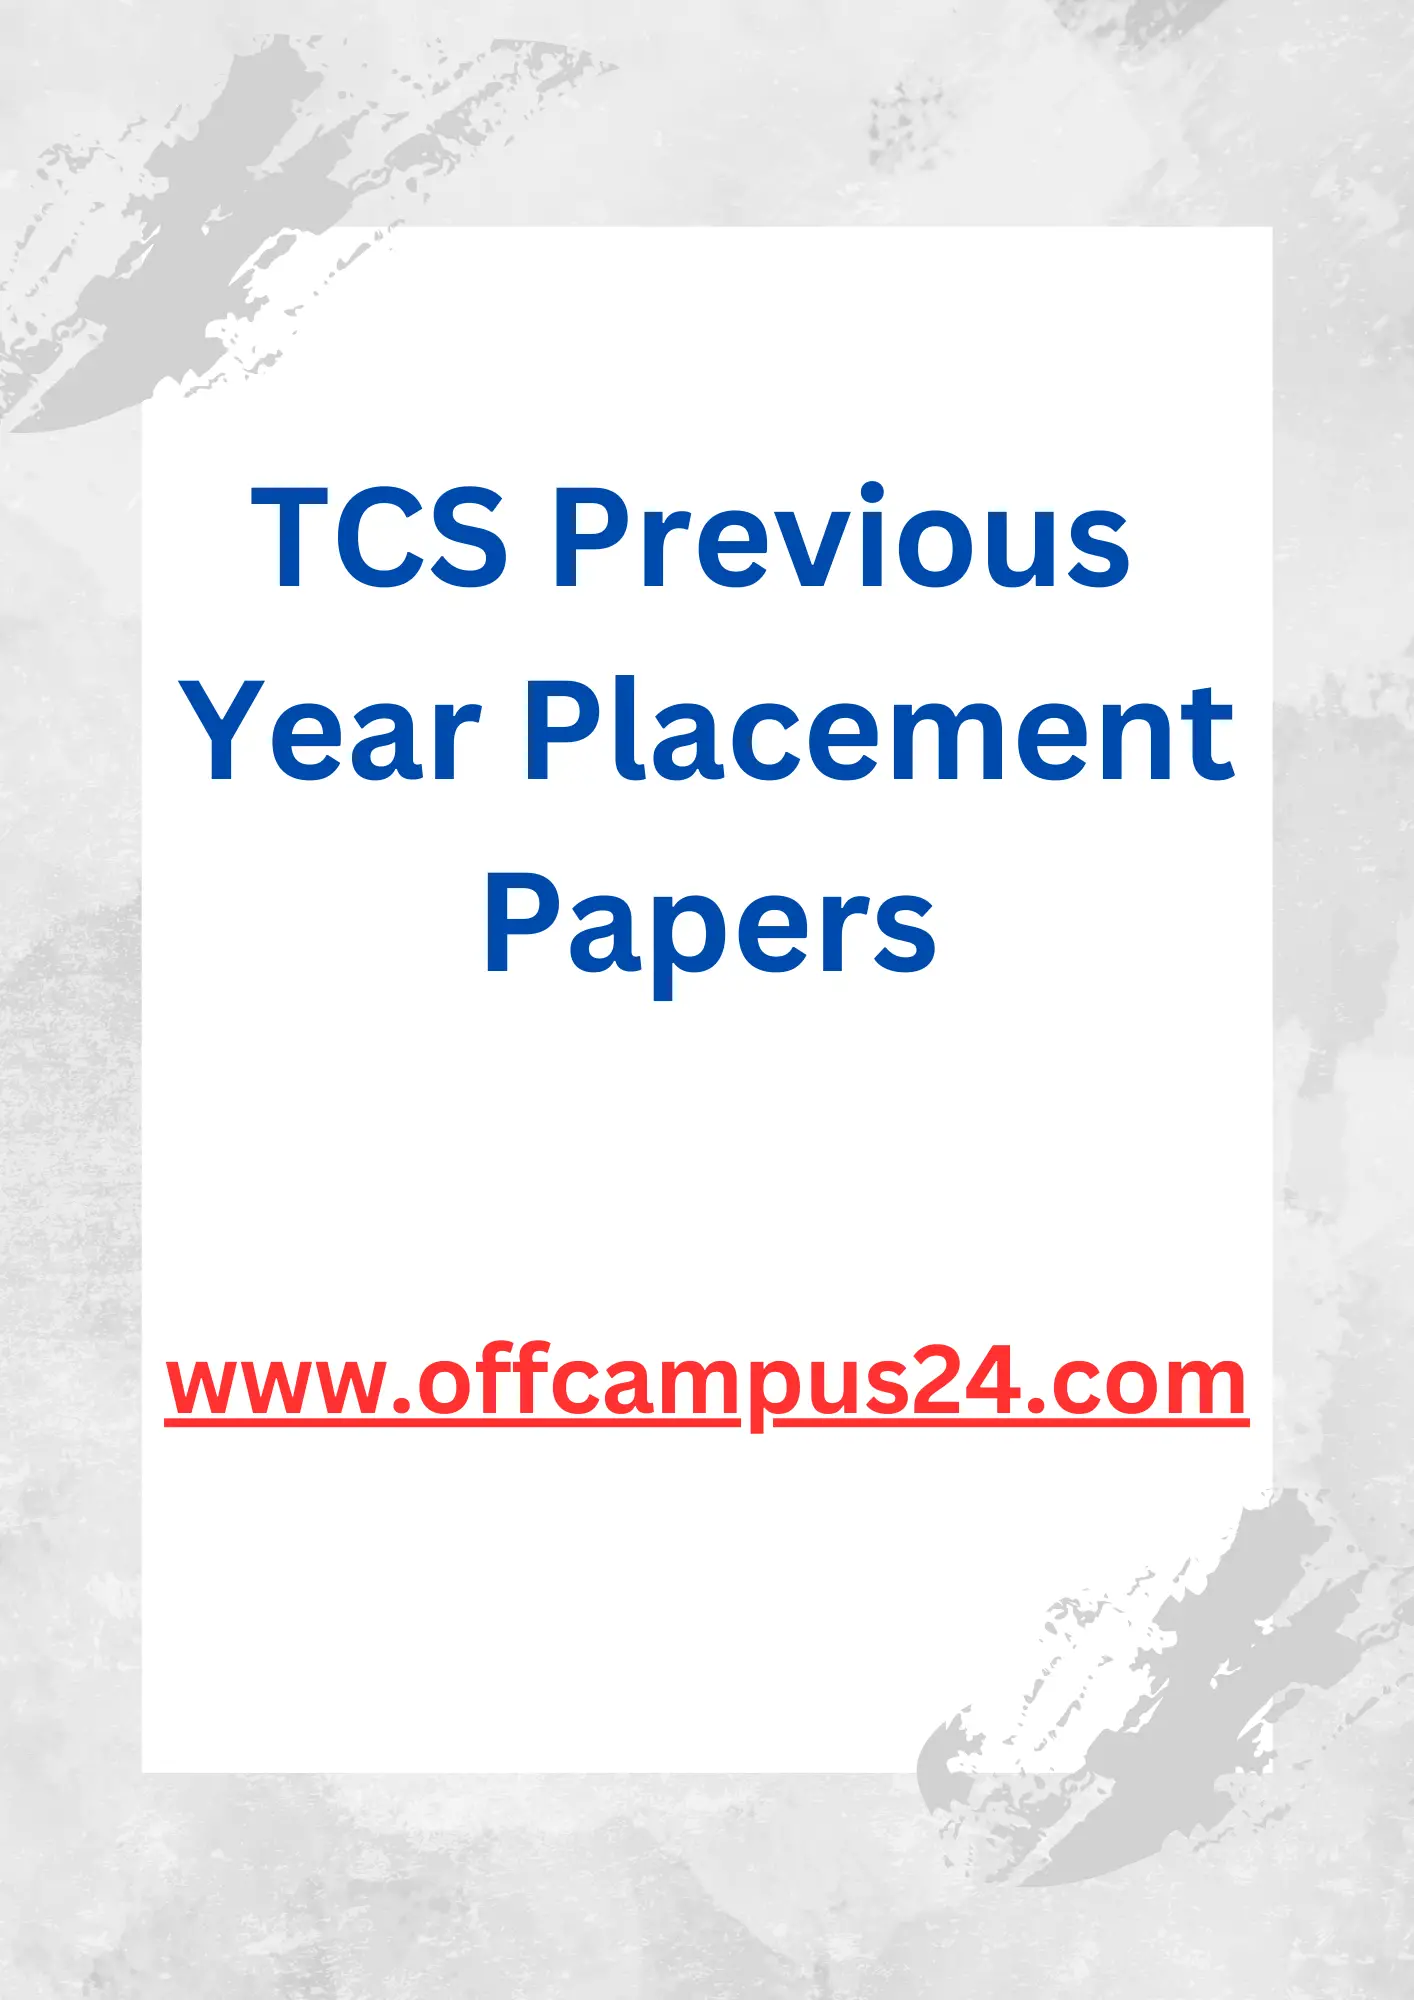 TCS previous year papers, TCS question papers, TCS placement papers, TCS sample papers, TCS interview questions, TCS written test papers, TCS recruitment test papers, TCS technical interview questions, TCS aptitude test papers, TCS coding test papers